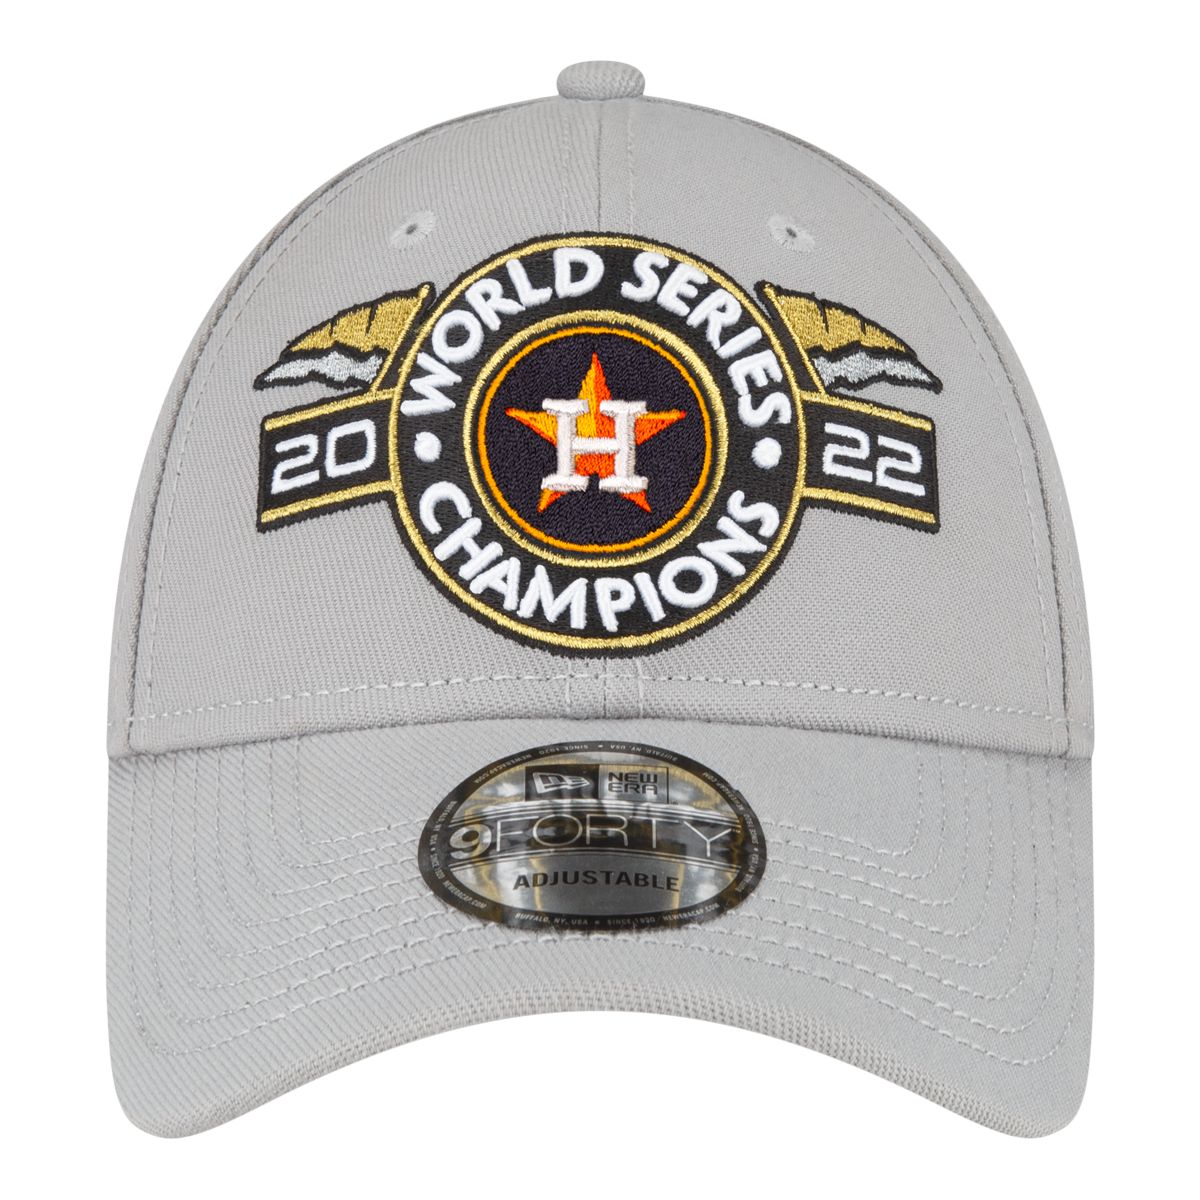 Where to buy Houston Astros World Series Champions gear online: Hats,  T-shirts, more 